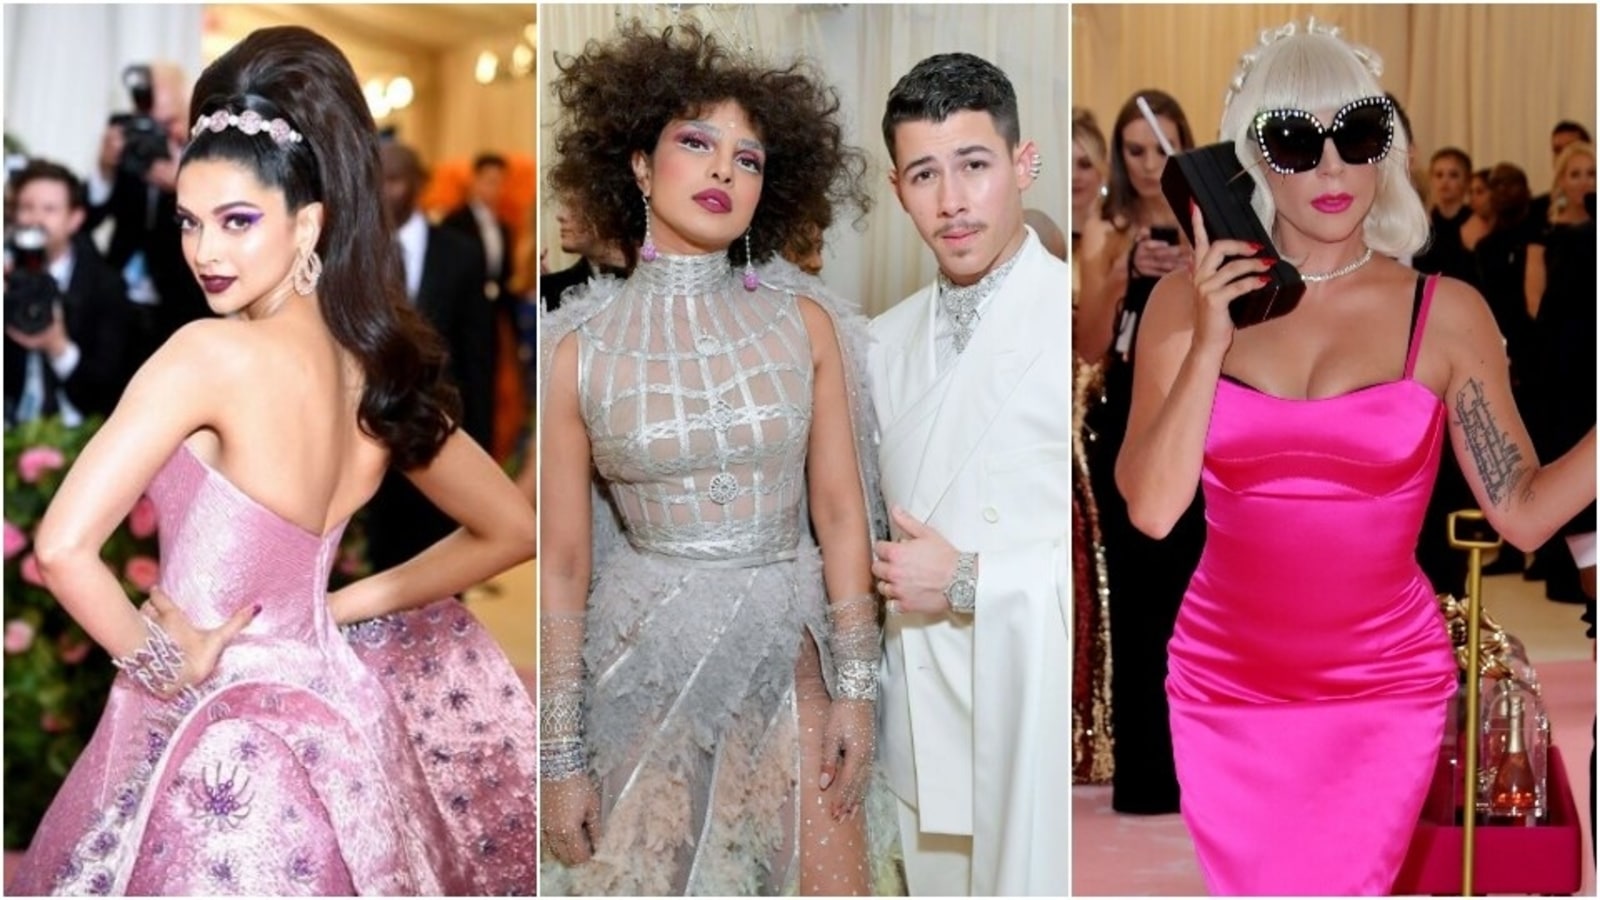 Met Gala 2021 Date, Time, Theme, Hosts, All You Need To Know About